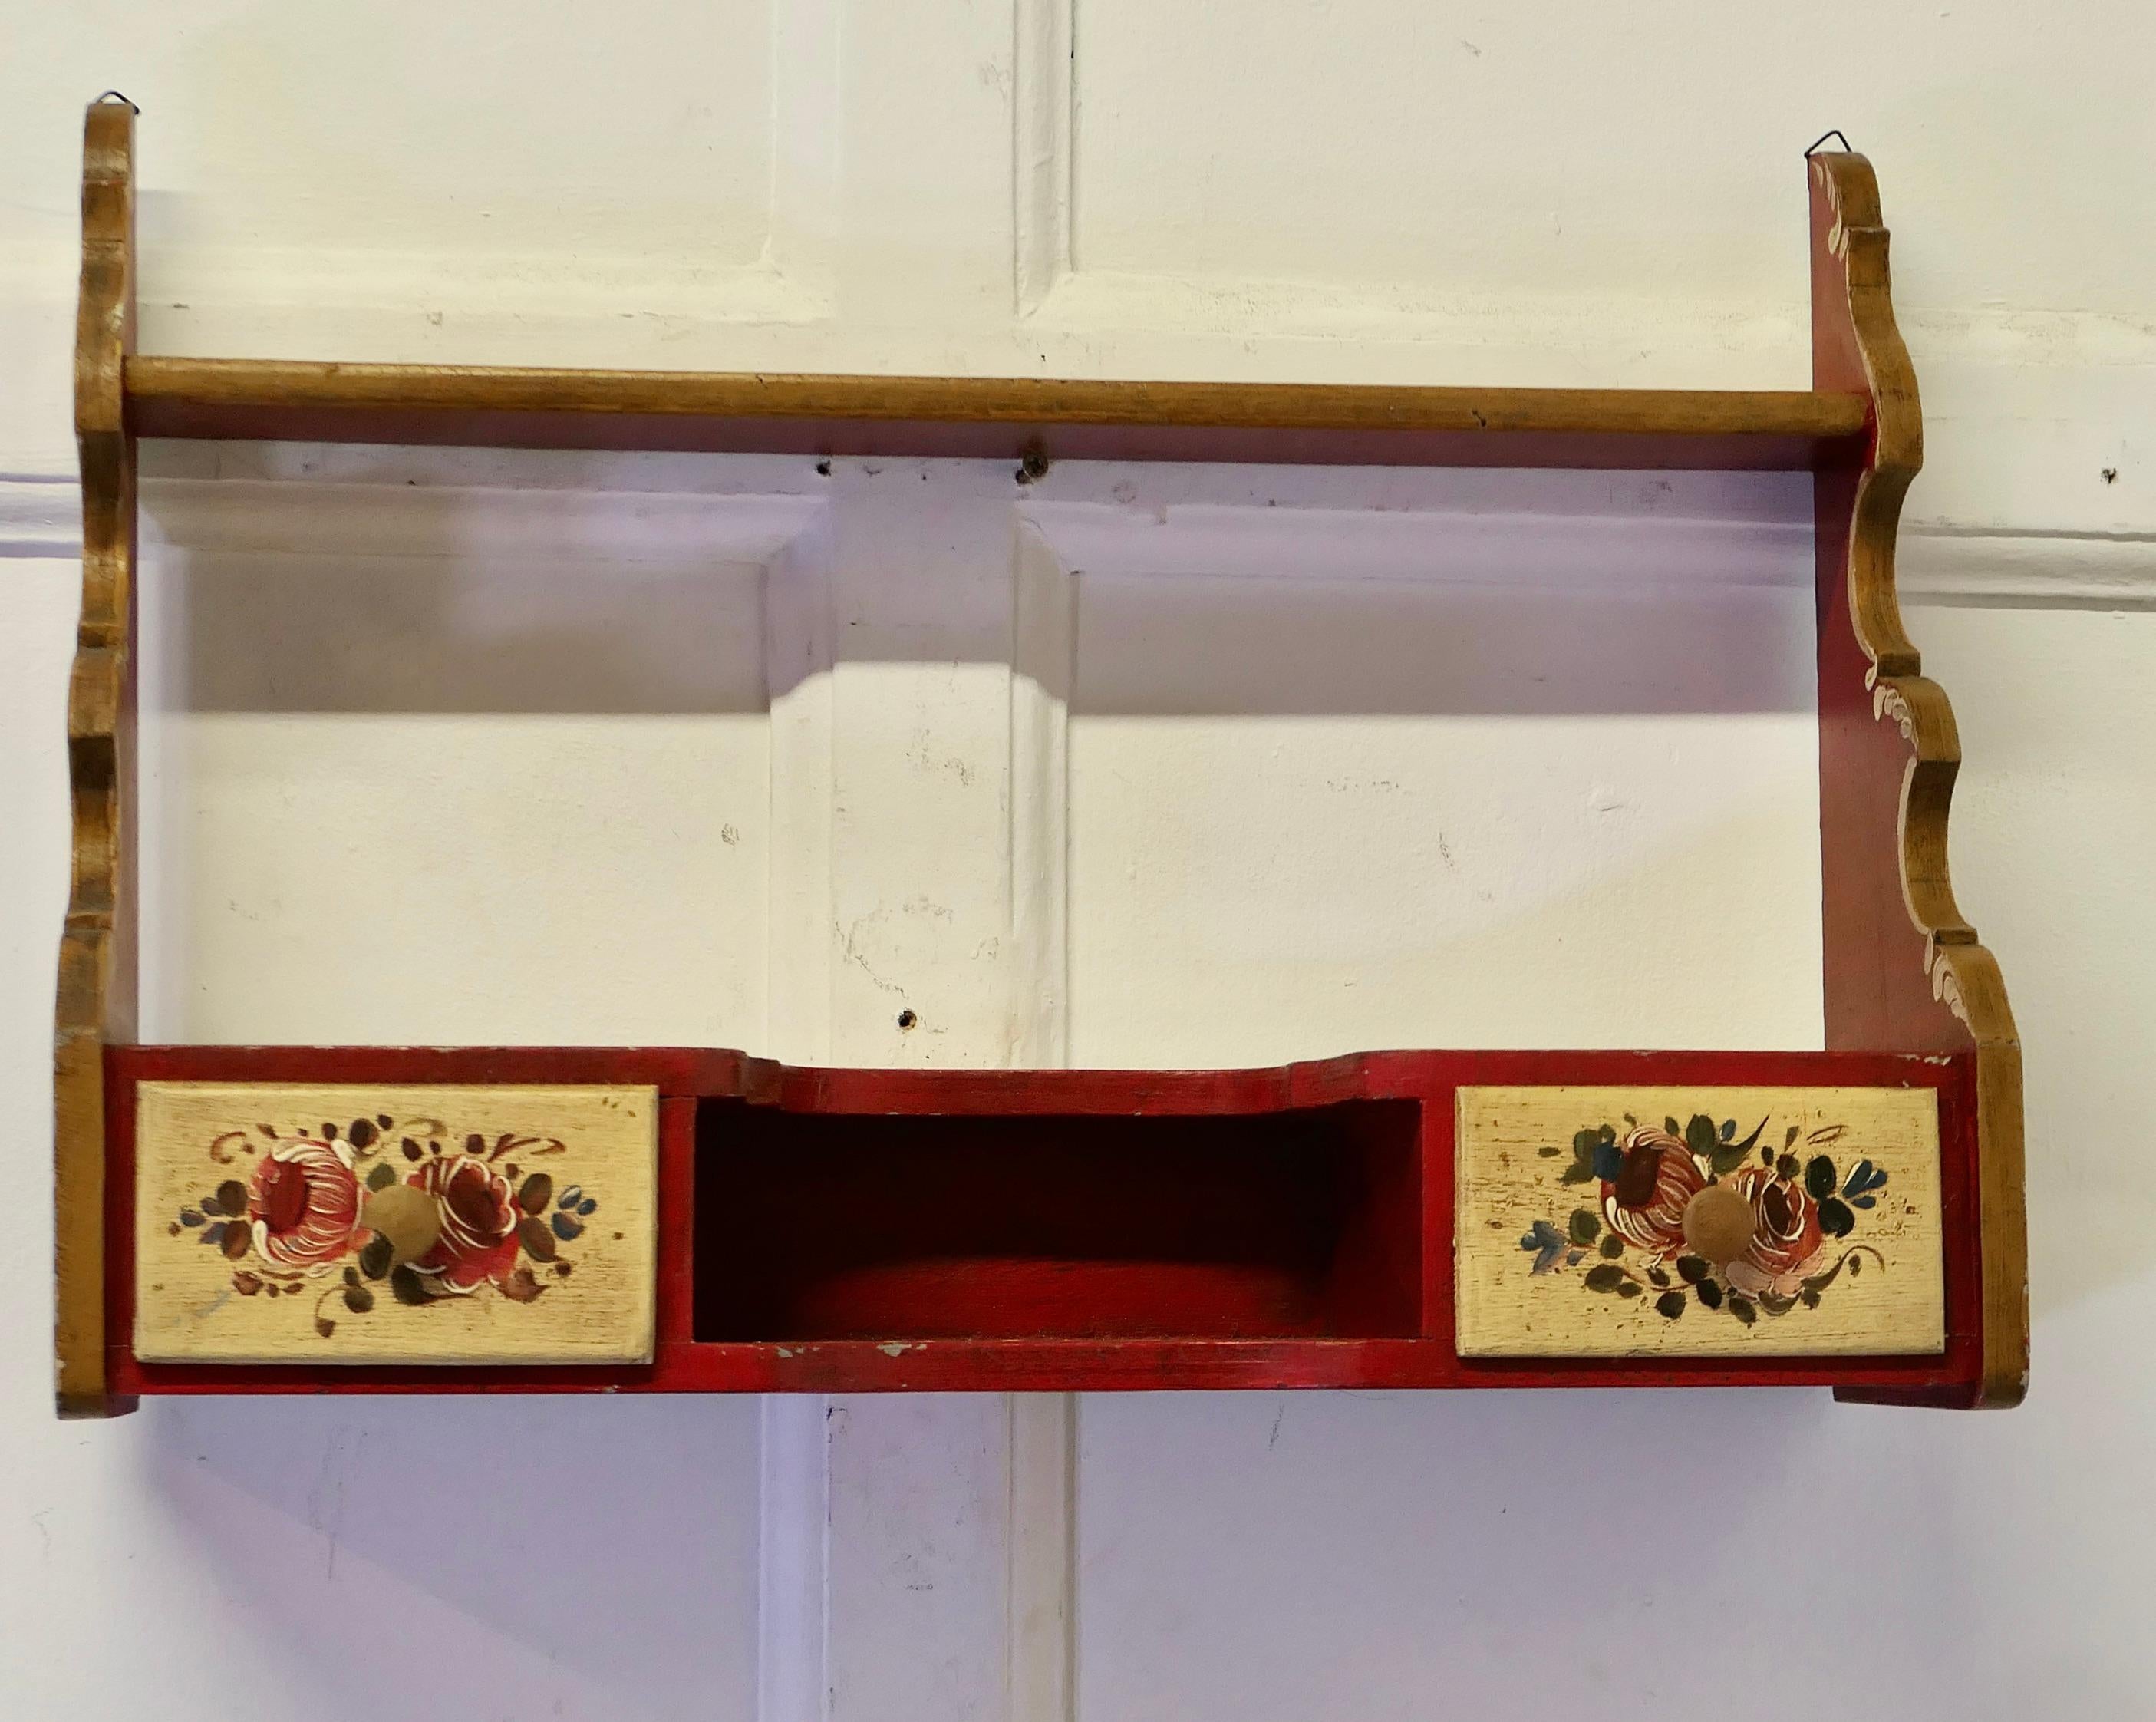 Rustic Painted Folk Art Wall Shelf with Drawers

This charming little wall hanging shelf has 2 small drawer and id hand painted in a Folk Art Style
The shelf is 14” high, 20” wide and 6” deep
FB74